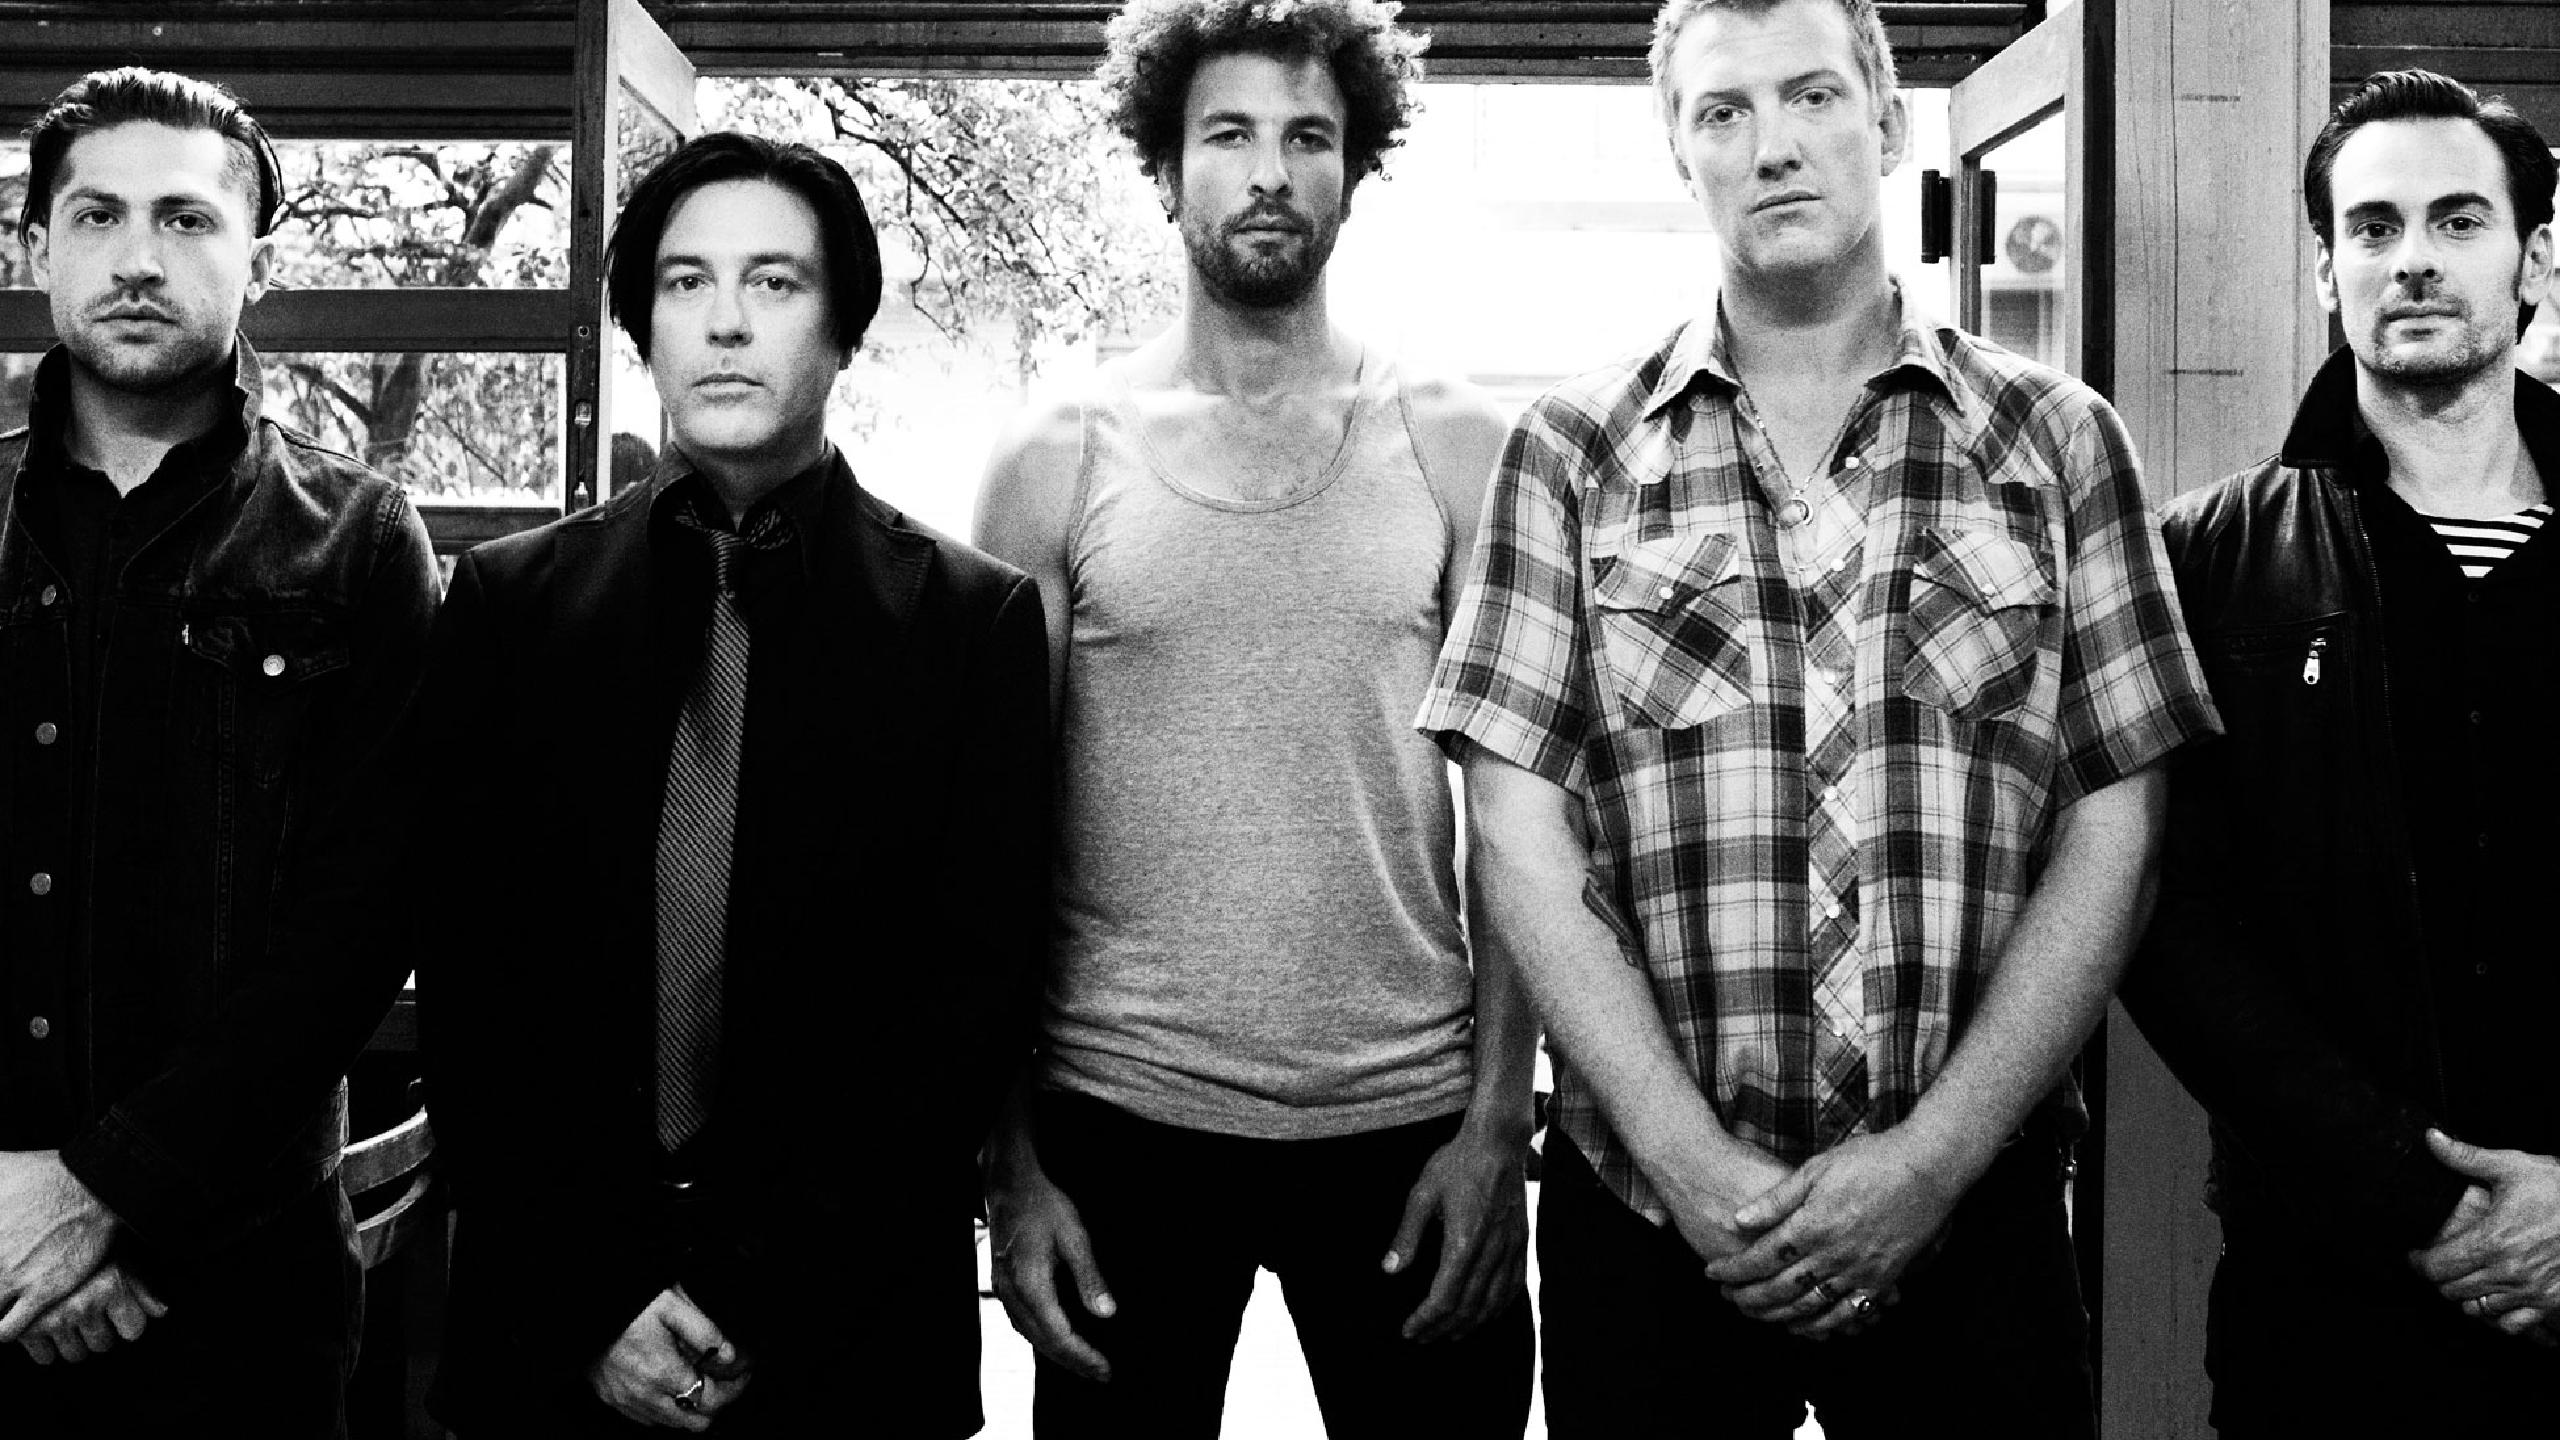 queens of the stone age tour 2022 france